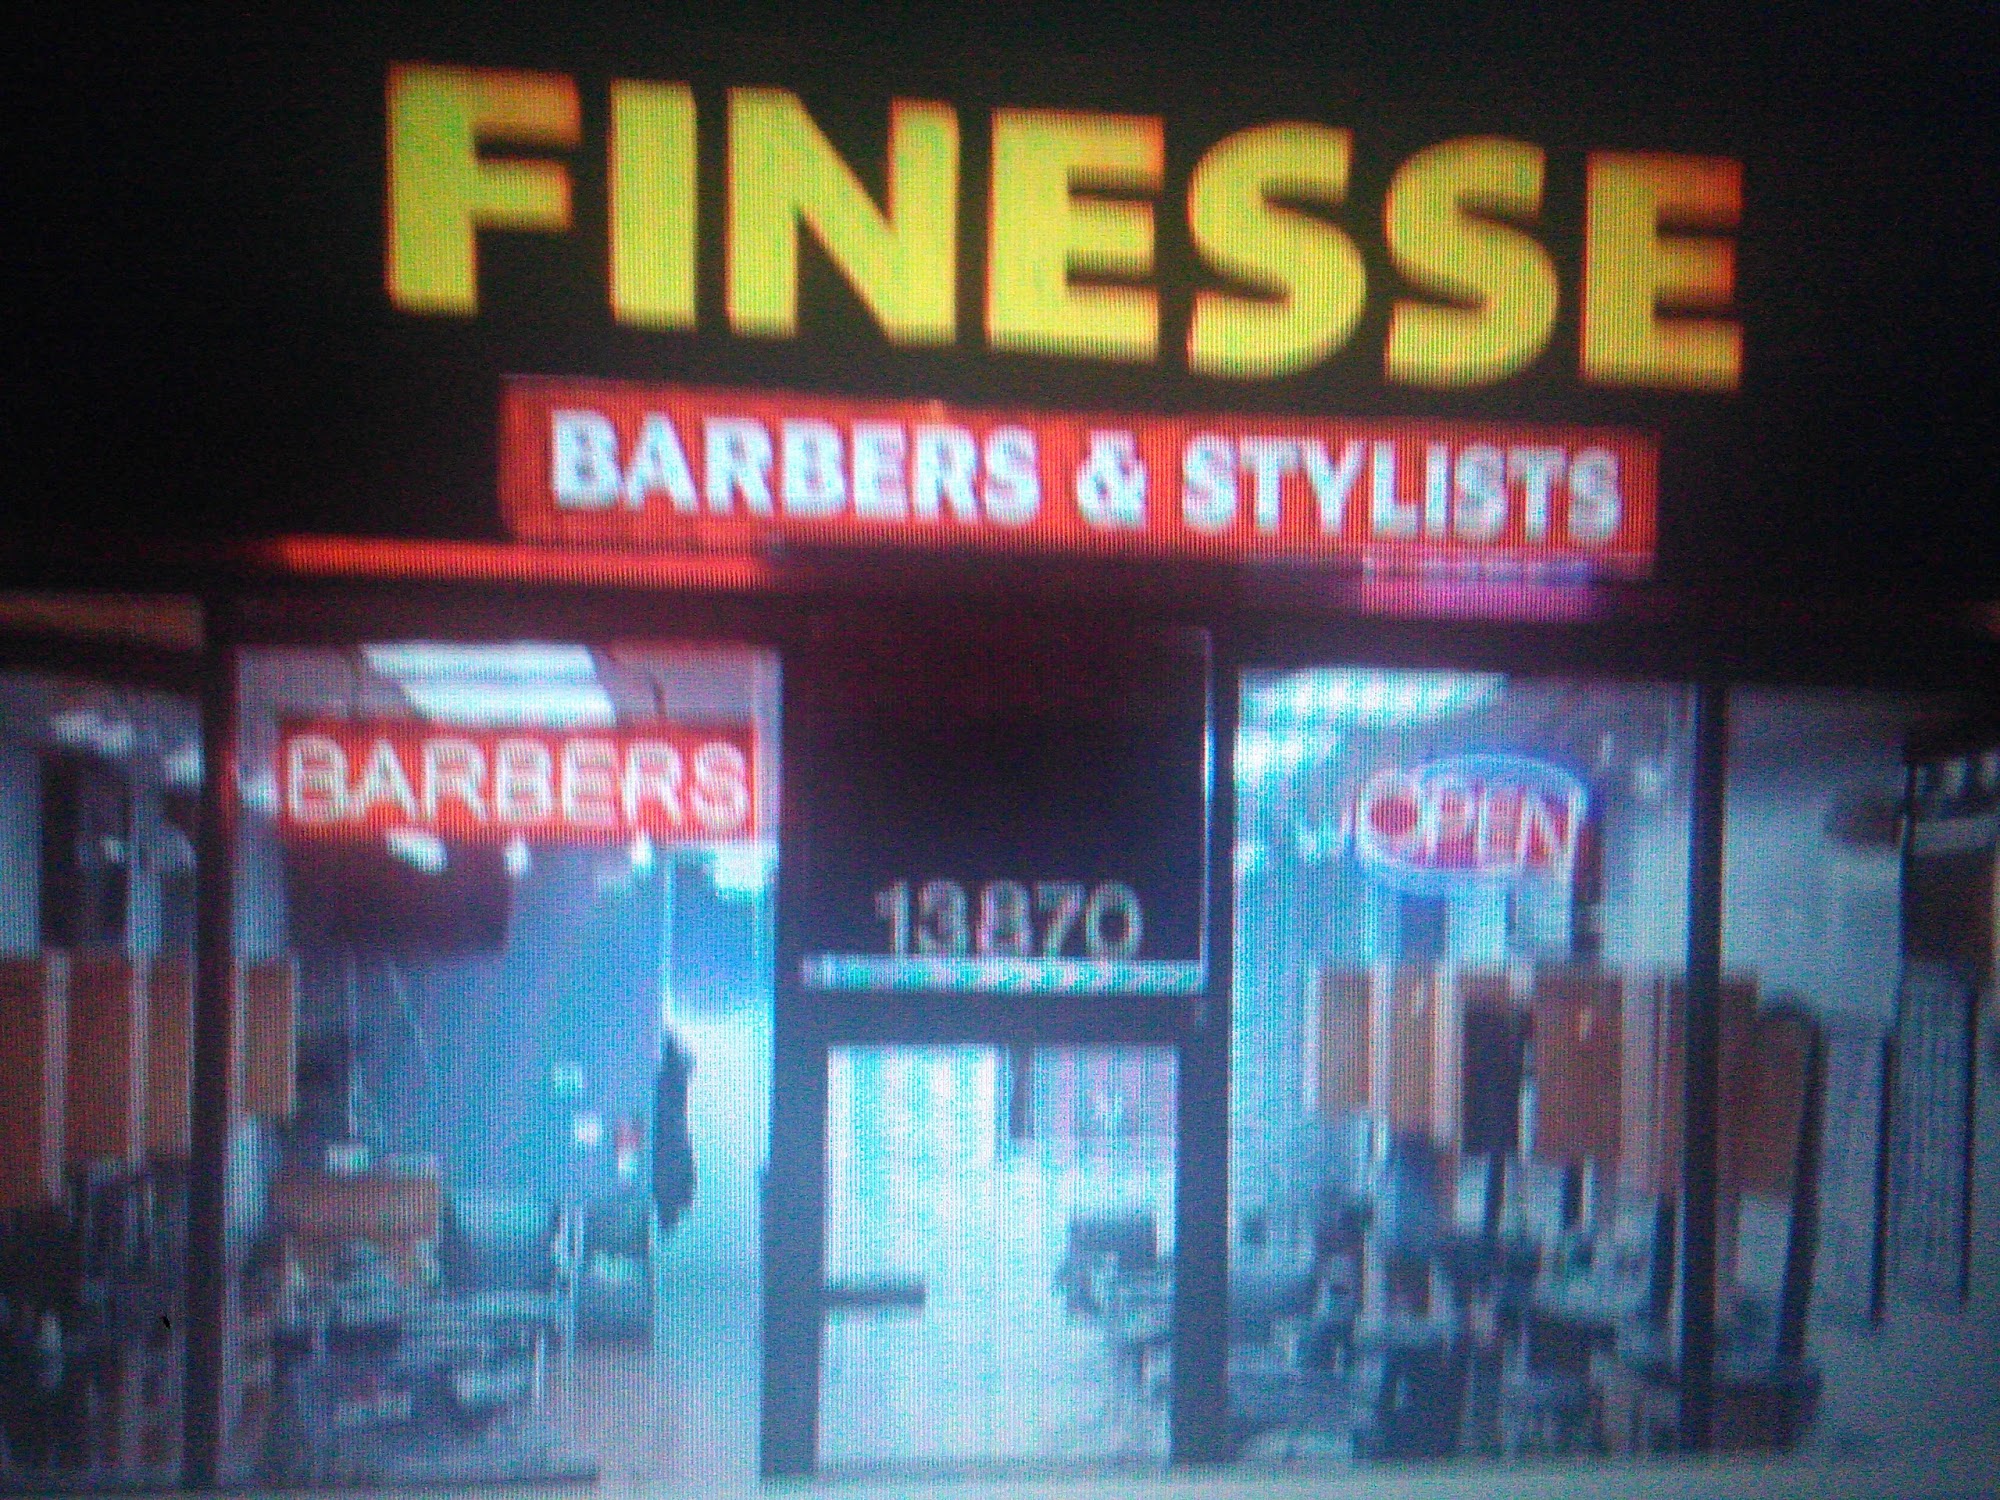 Finesse Barbers and Stylists